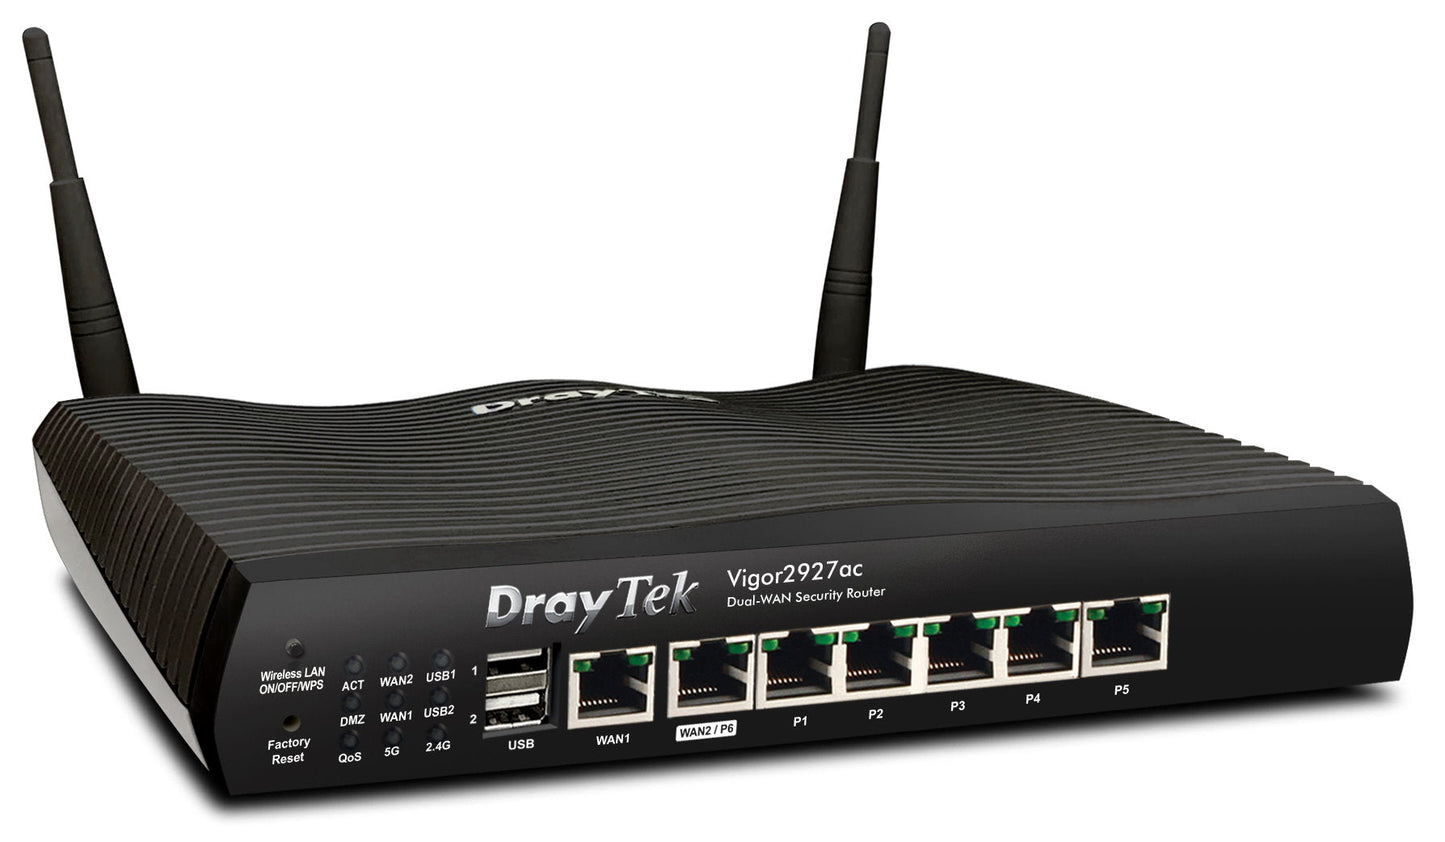 Draytek 2927ac Dual-WAN Security Router Right Side View